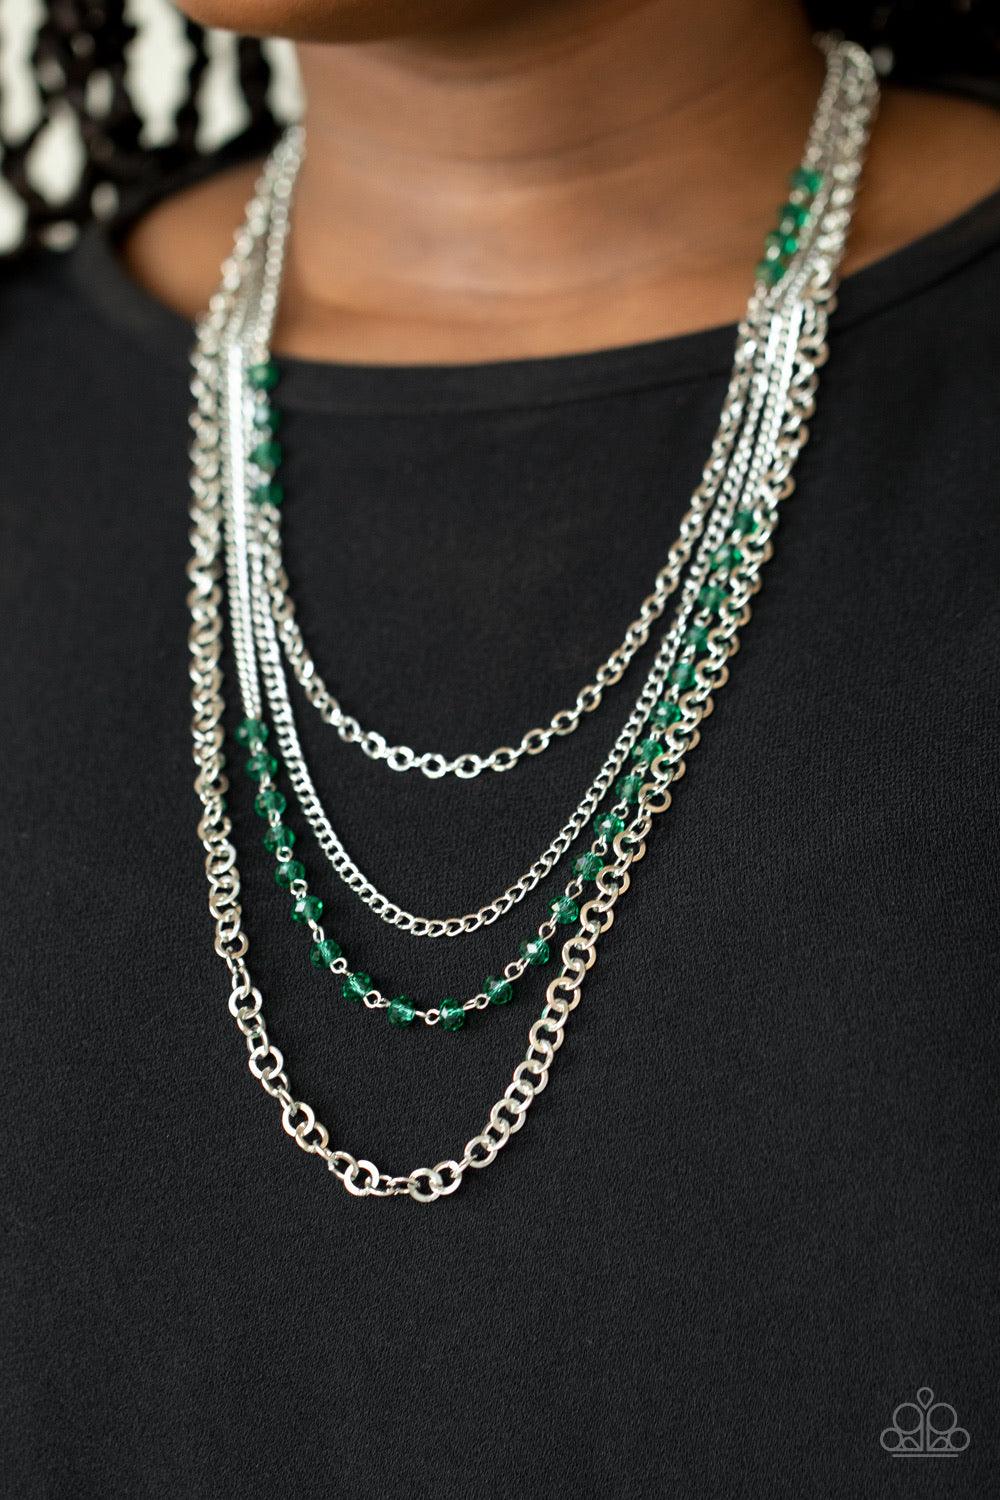 Paparazzi Accessories Flickering Lights - Green Featuring sections of glittery green crystal-like beads, a collision of mismatched silver chains drapes down the chest, creating flickering layers. Features an adjustable clasp closure. Sold as one individua